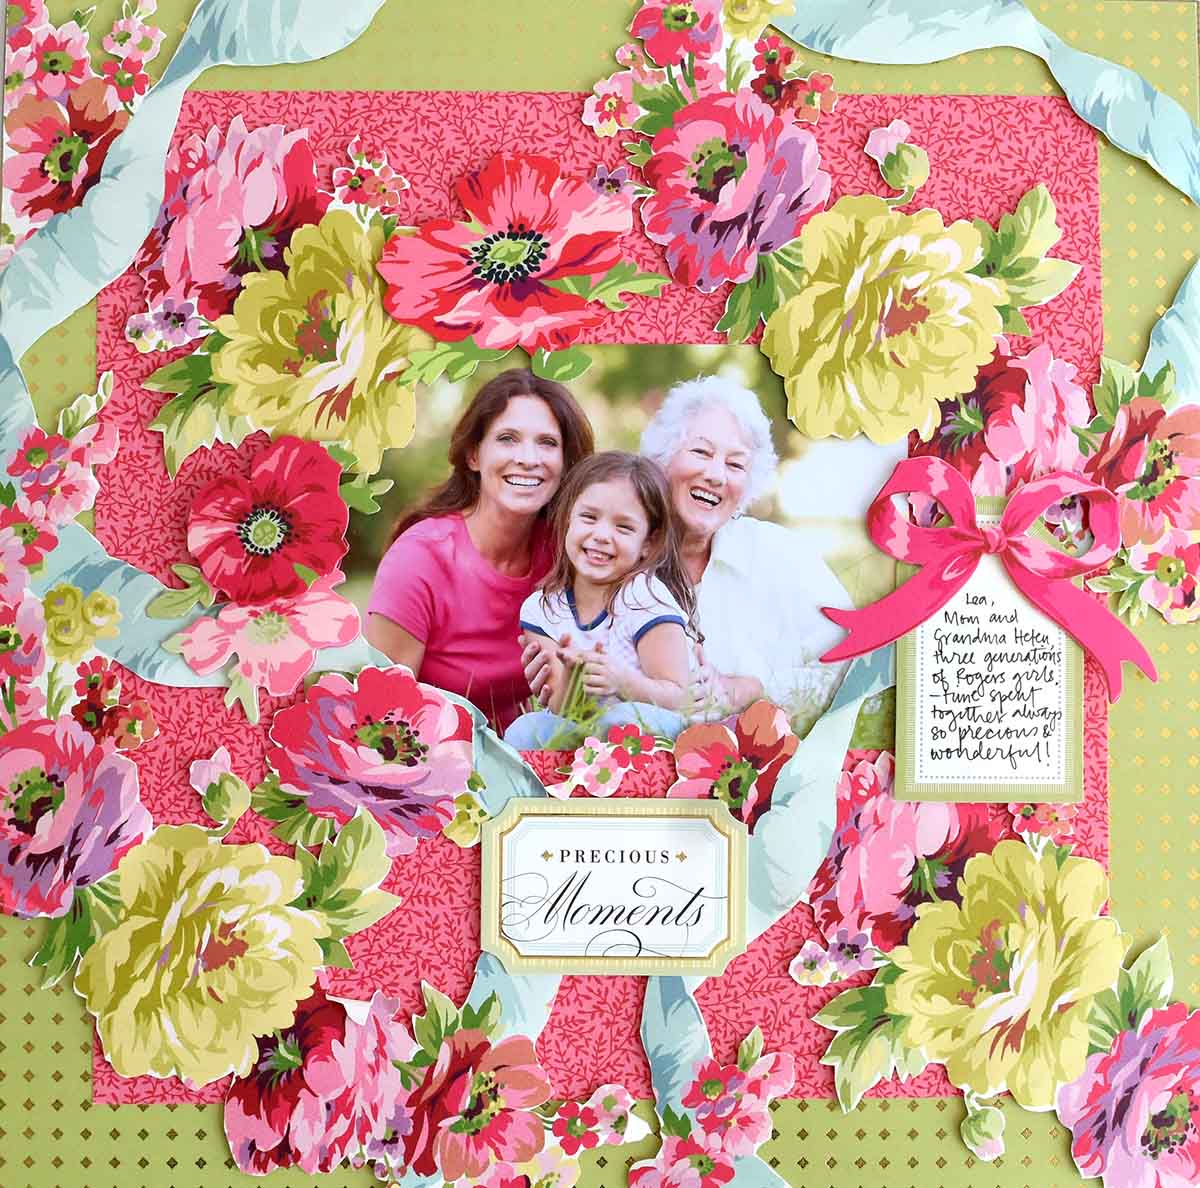 a mother's day card with flowers and a picture of her daughter.